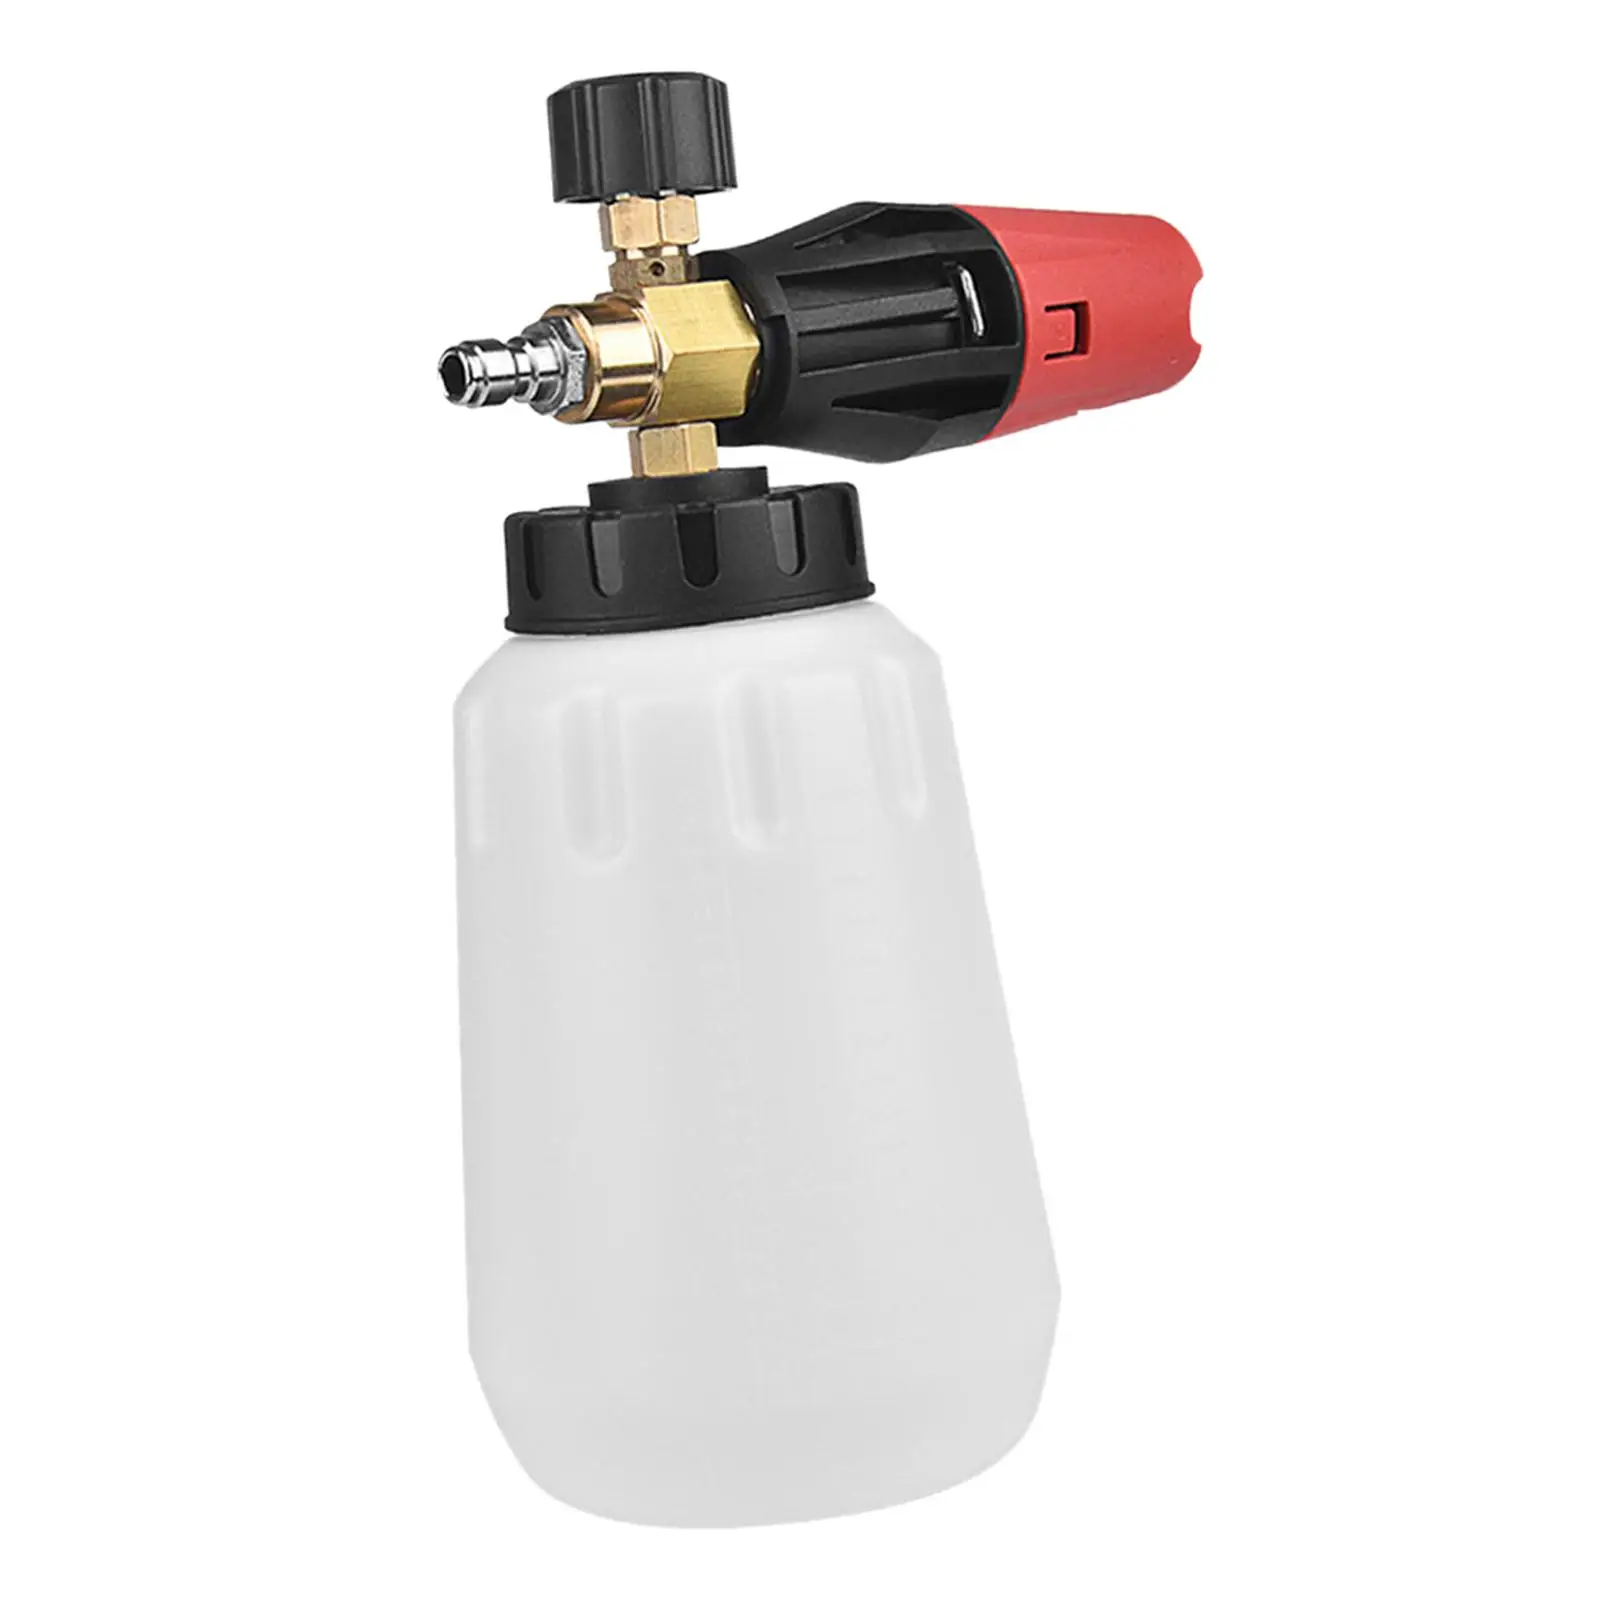 Primary image for Portable Foam Sprayer Car Washer Bottle High Pressure for House Cleaning, 1pcs